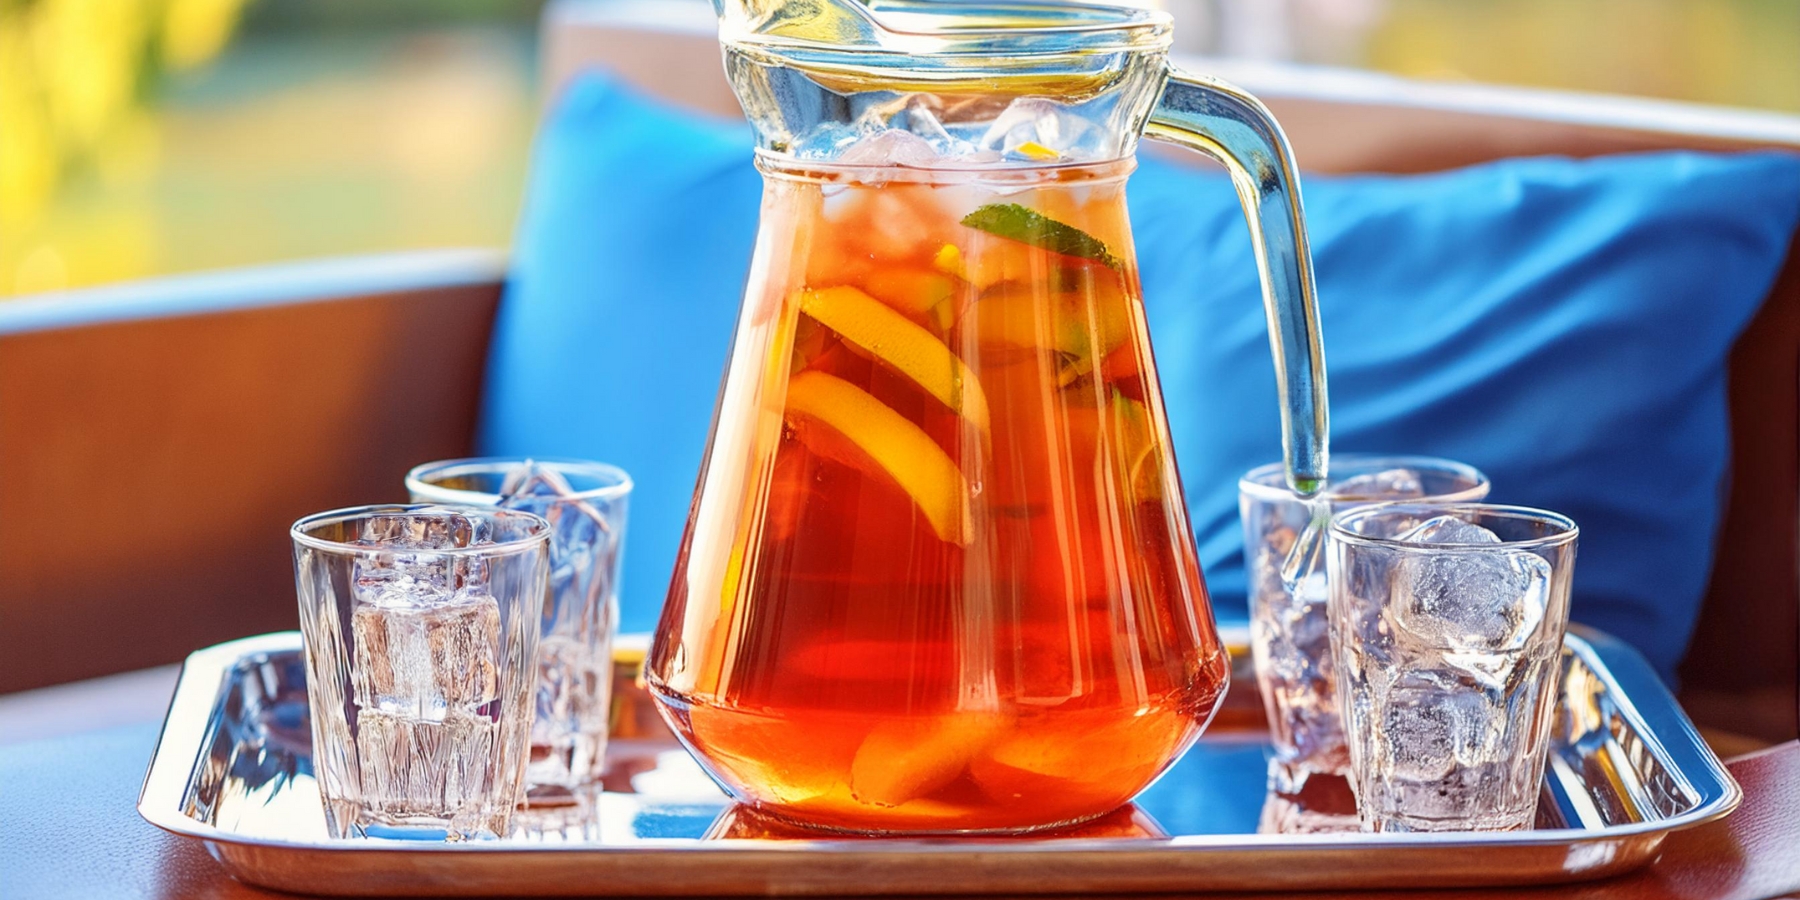 A jug of iced tea served on a tray with glasses of ice in an outdoor setting